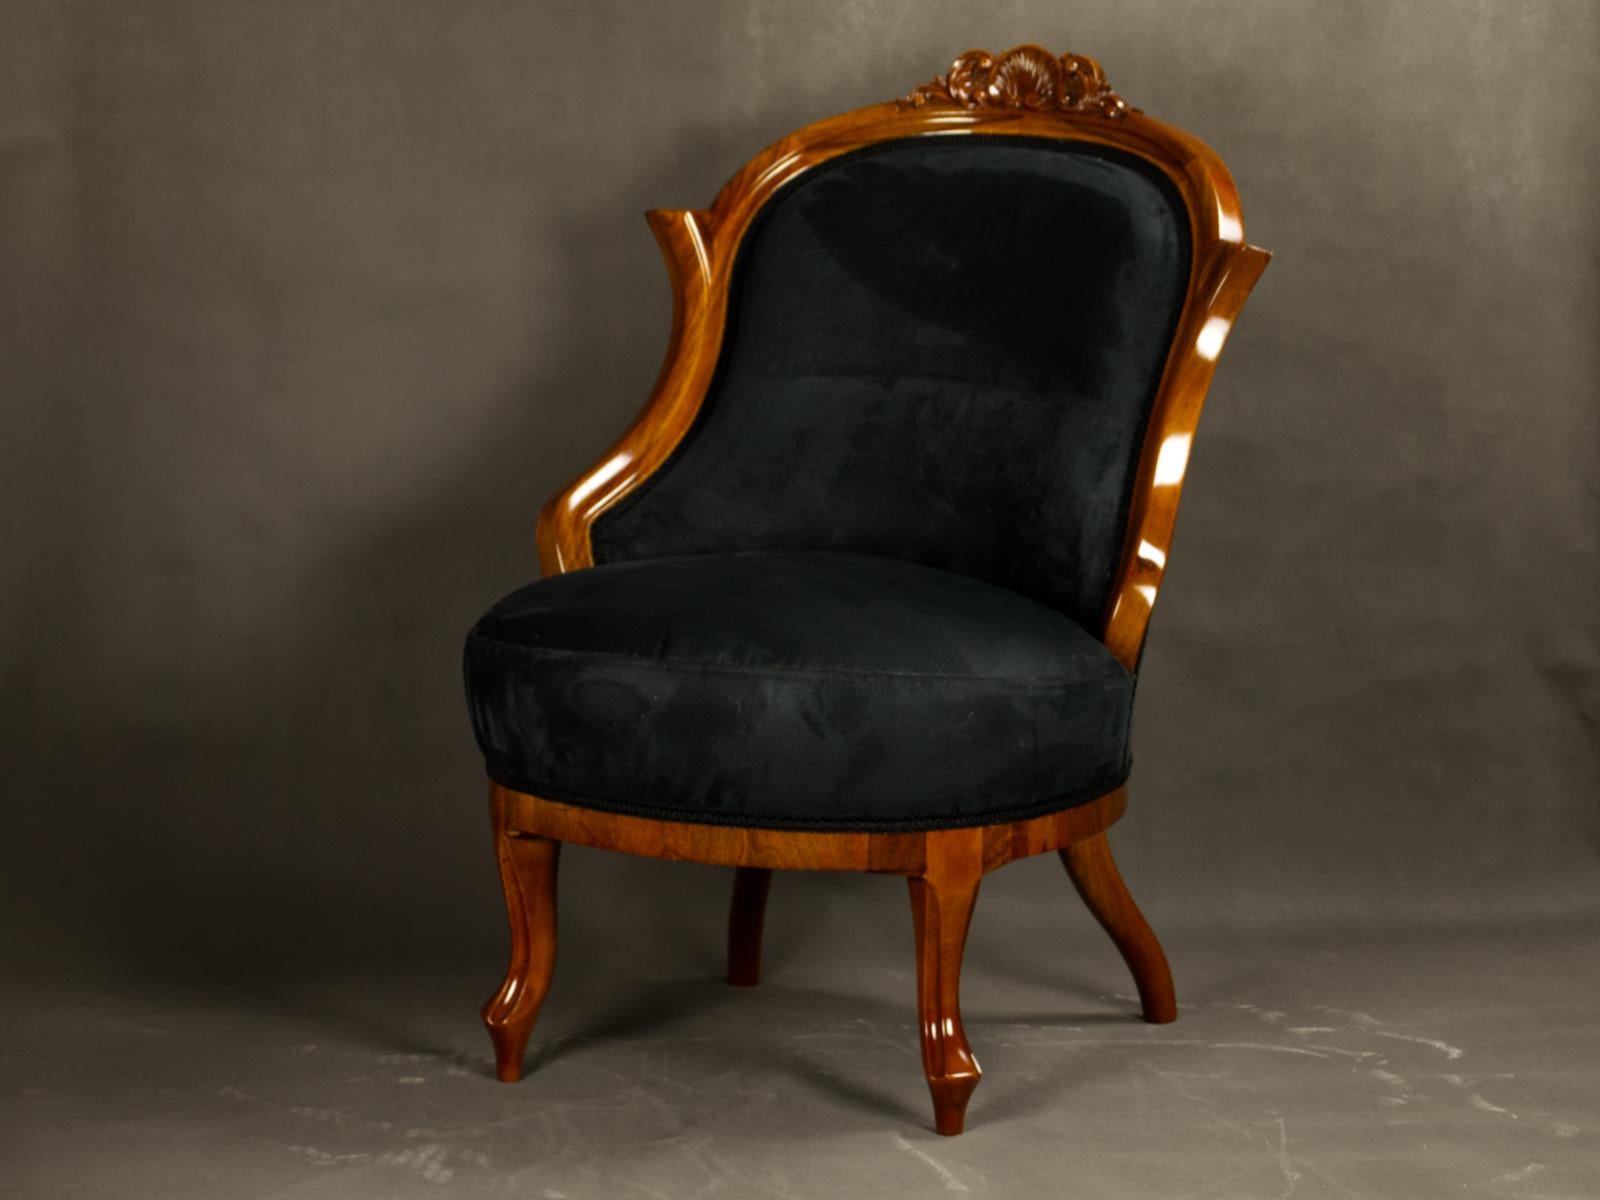 Pair of beautiful Biedermeier Armchairs / chairs, mid 19th century from Vienna, Austria. Walnut veneered on the backs and solid walnut legs. Chairs are restored and French polished. Newly upholstered with black fabric. Upholstered in the traditional